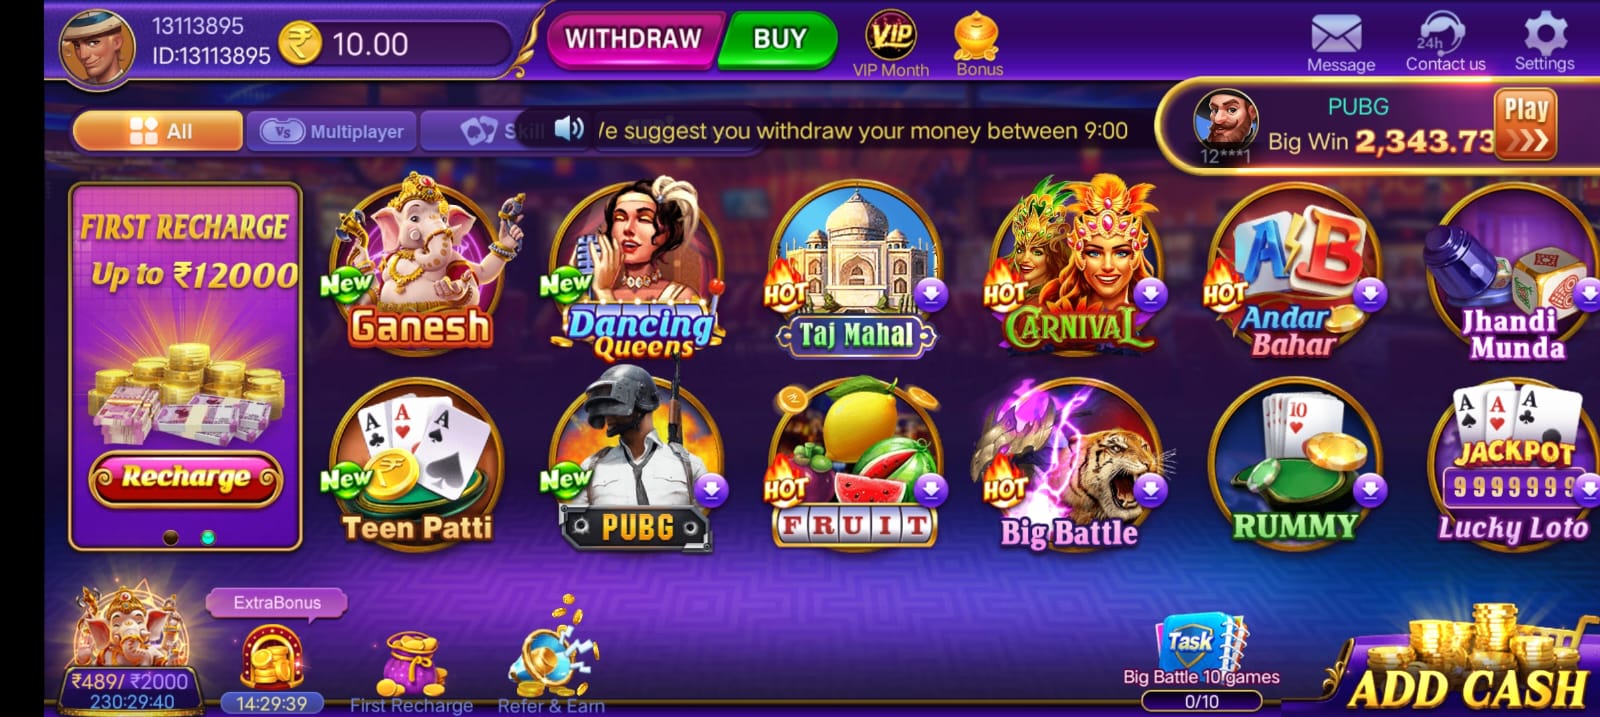 Available All Games on Royal Slots App